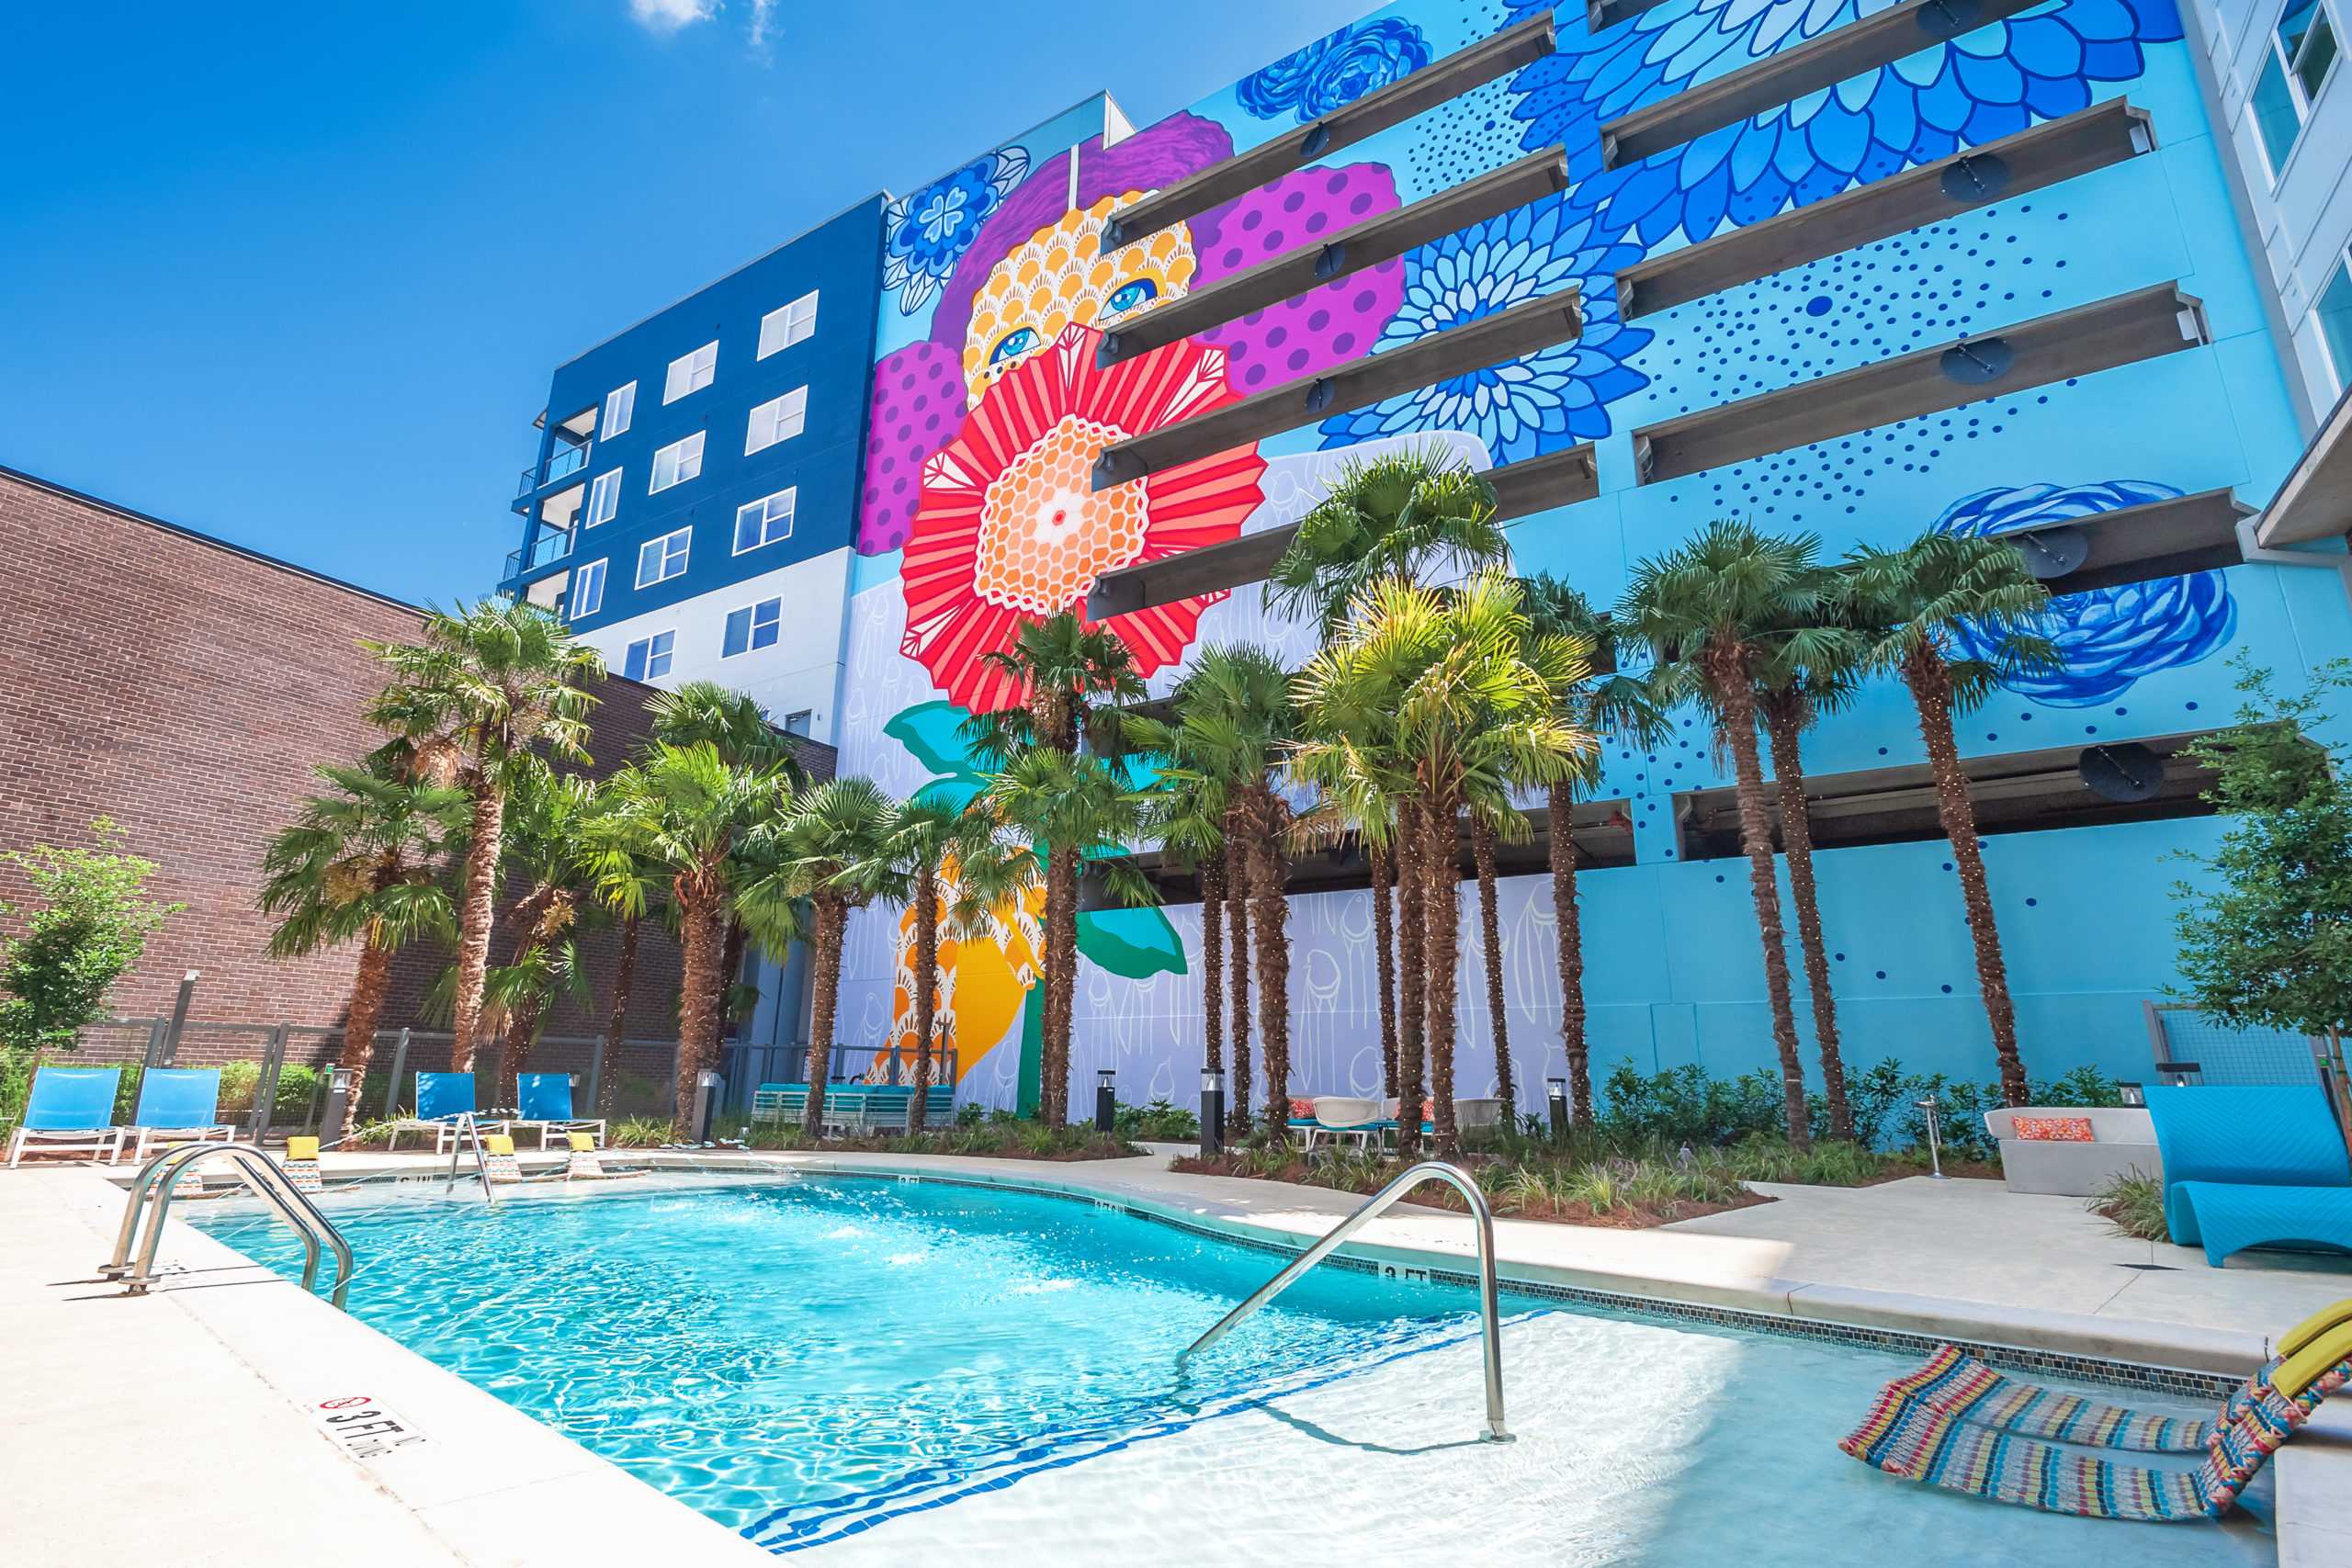 Heated resort-style swimming pool surrounded by palm trees and a vibrant mural at EDGE on the Beltline in Atlanta, Georgia